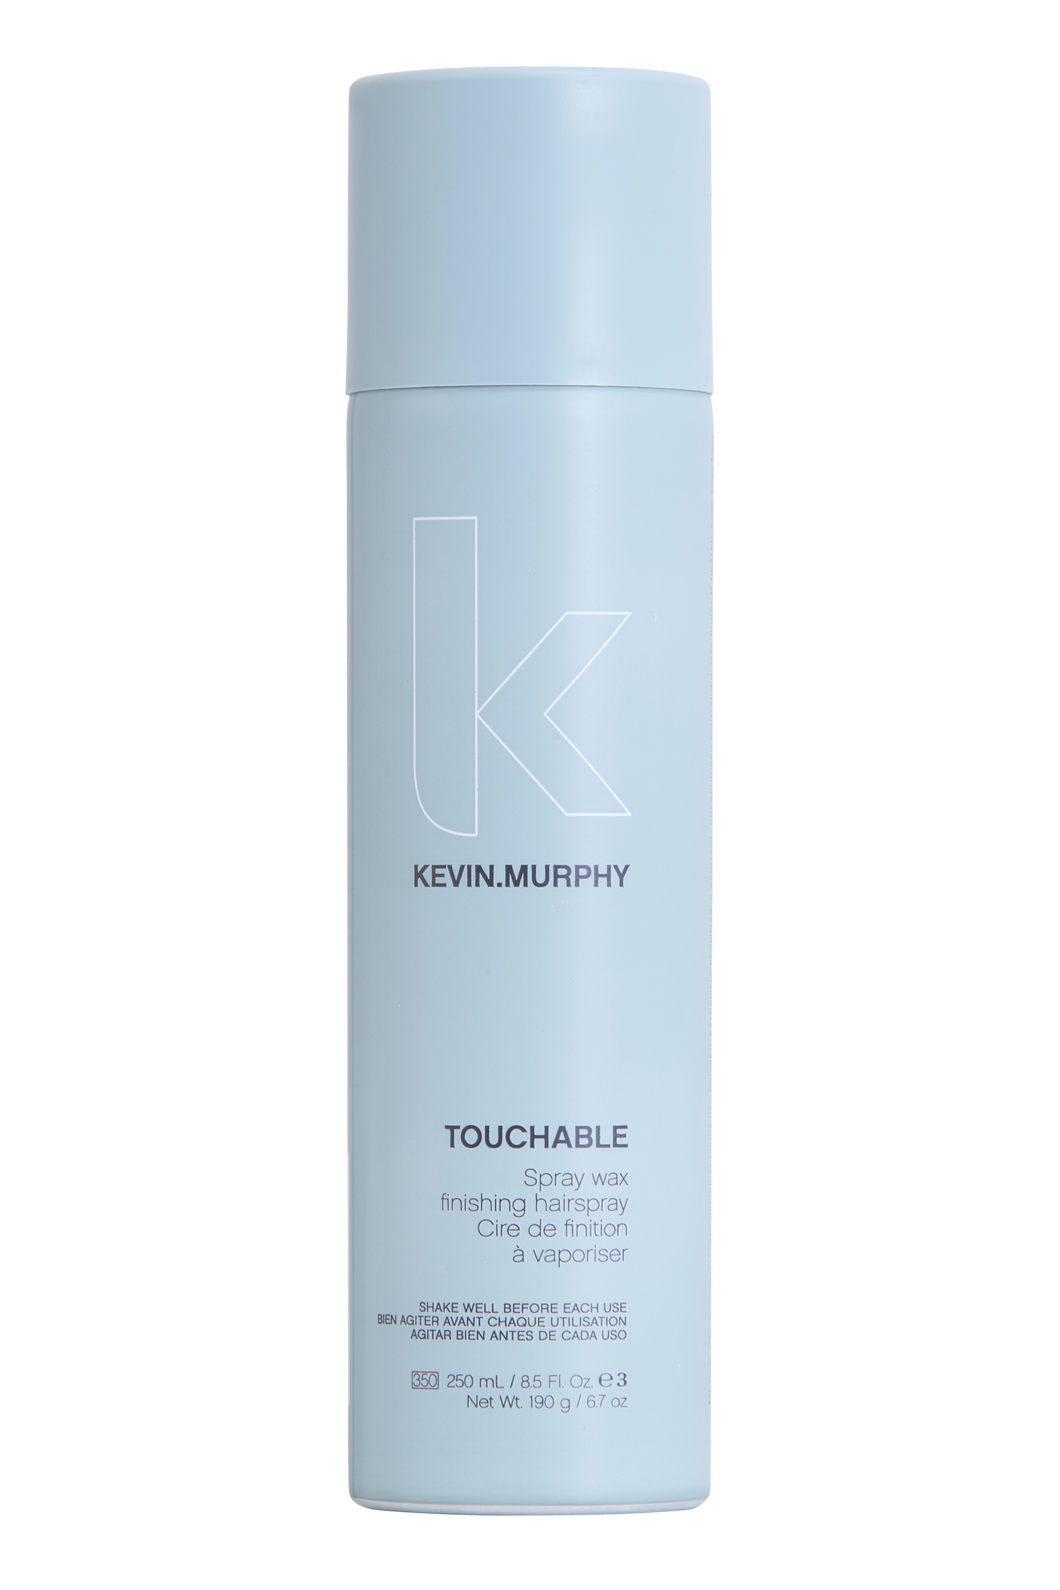 KEVIN.MURPHY- TOUCHABLE